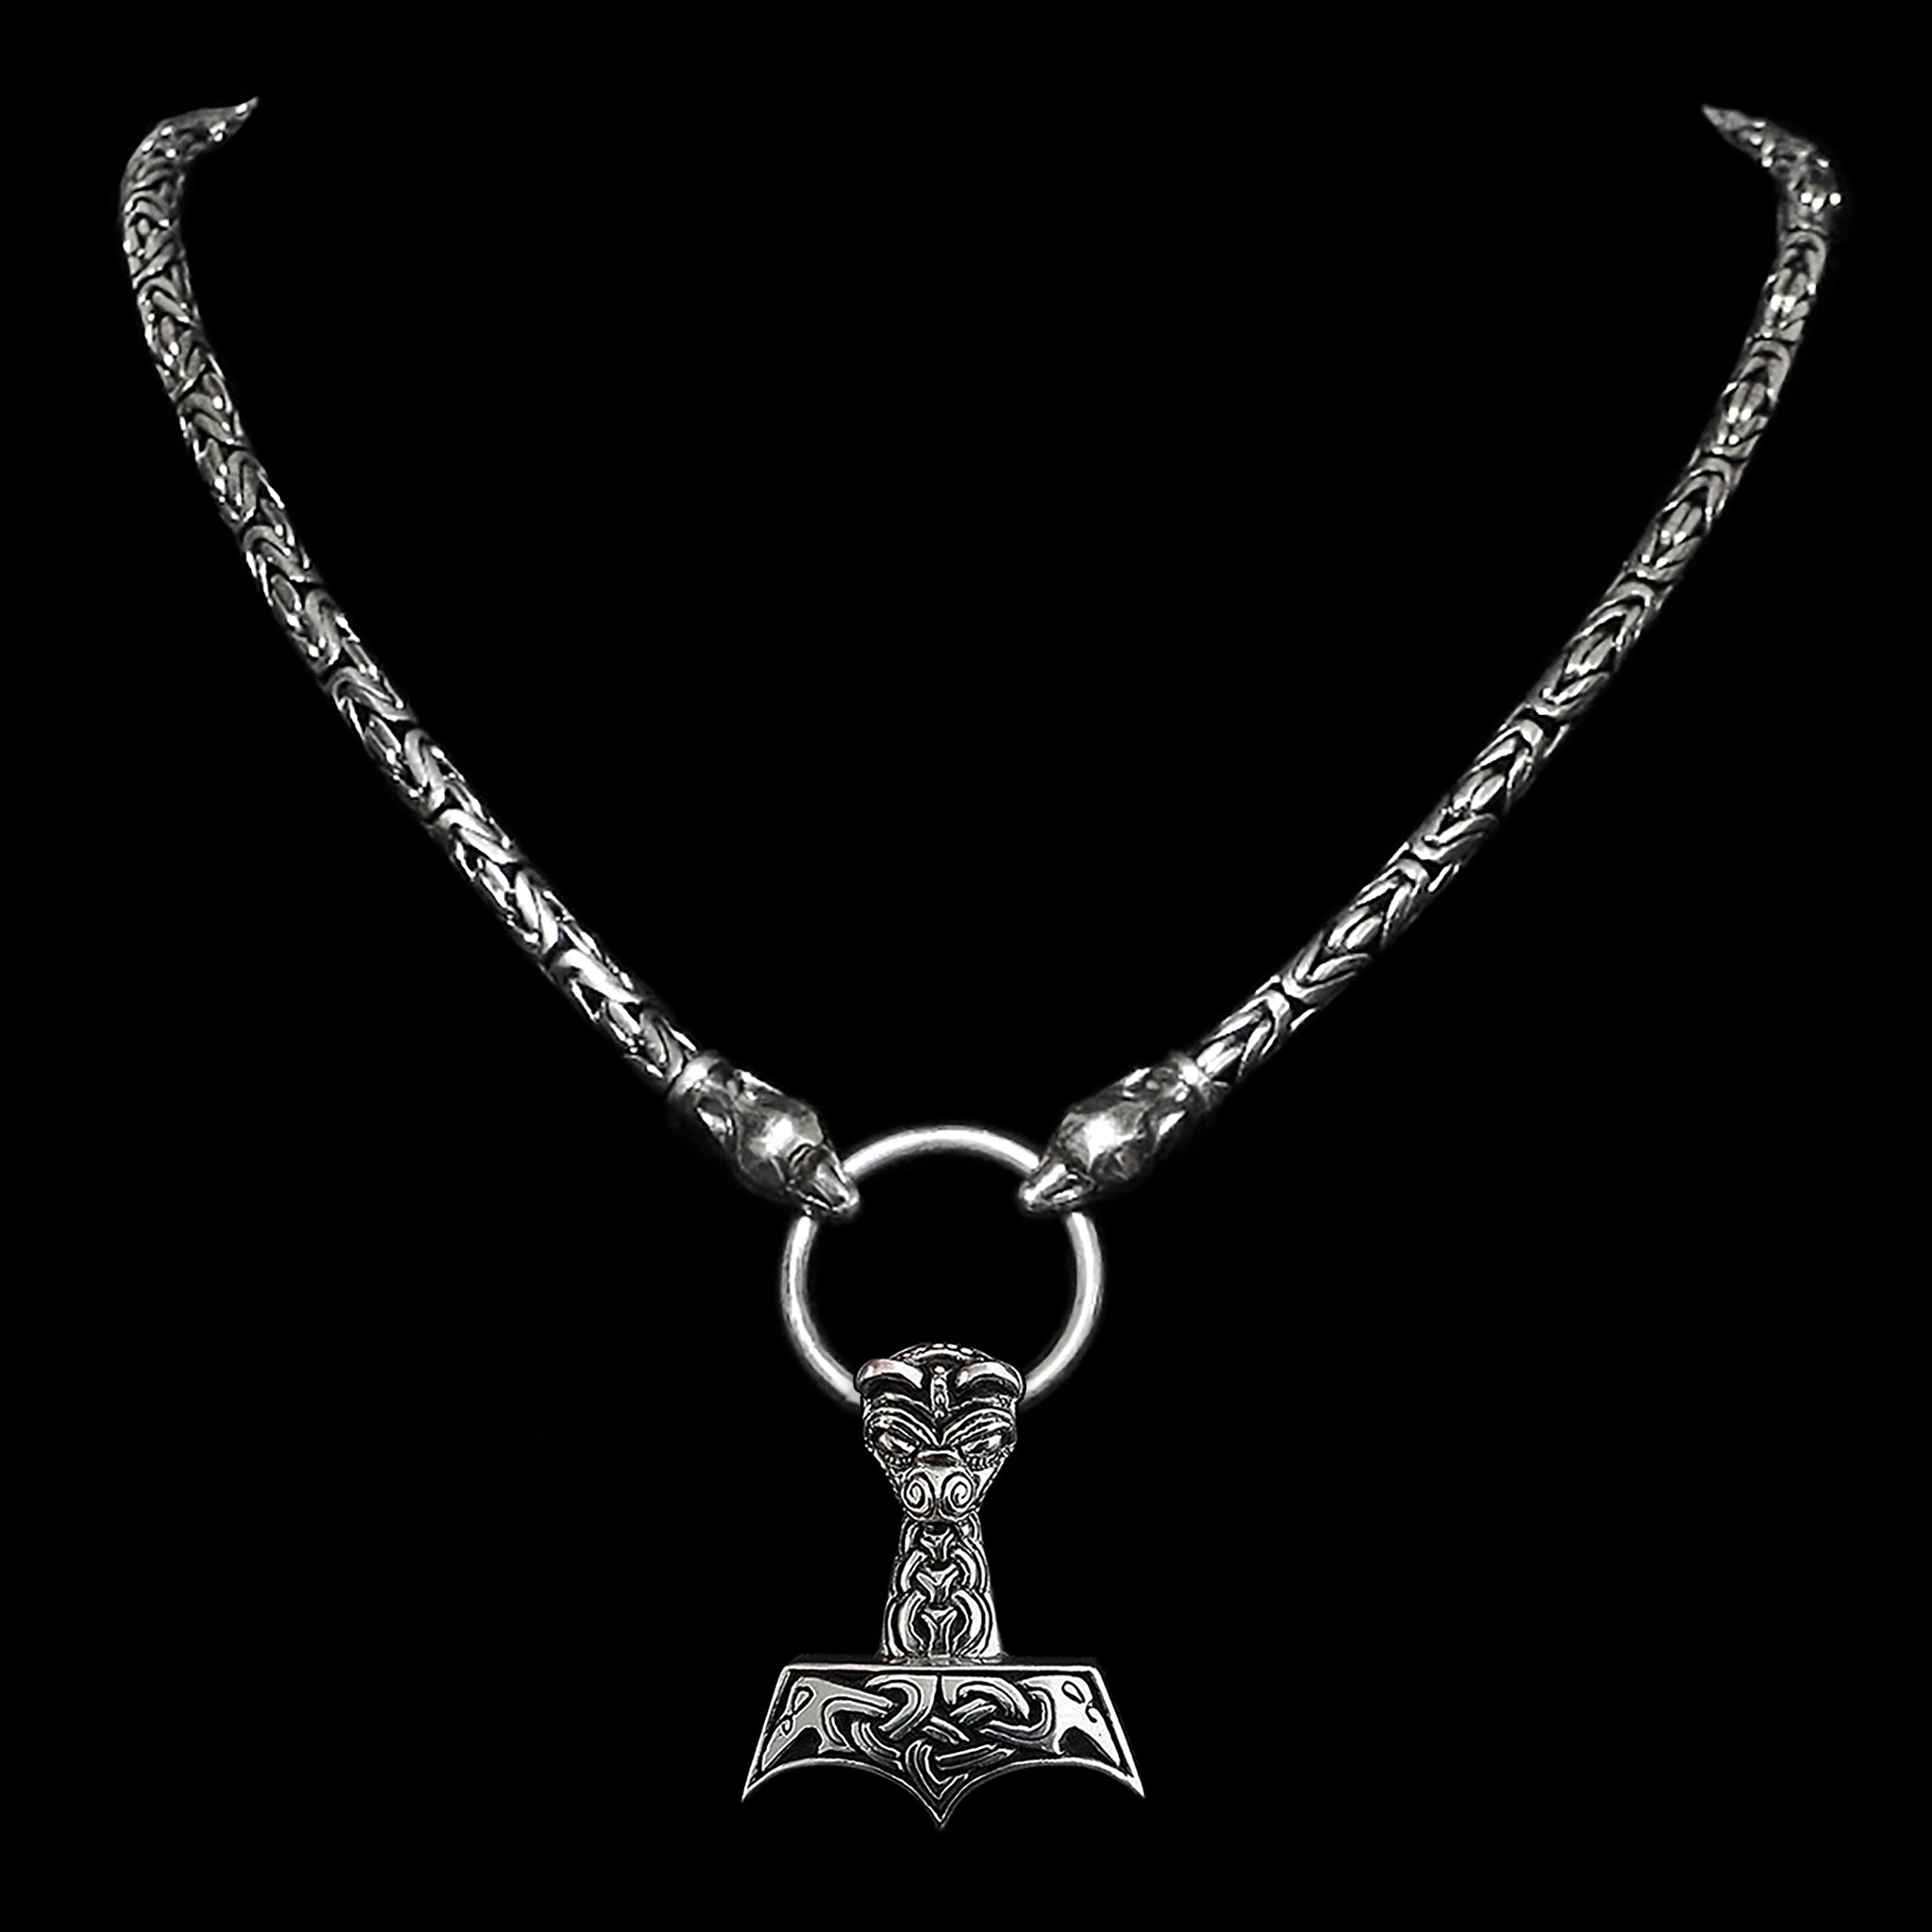 5mm Thick Silver King Chain Thors Hammer Necklace with Ferocious Wolf Heads - Large & Ferocious Thors Hammer